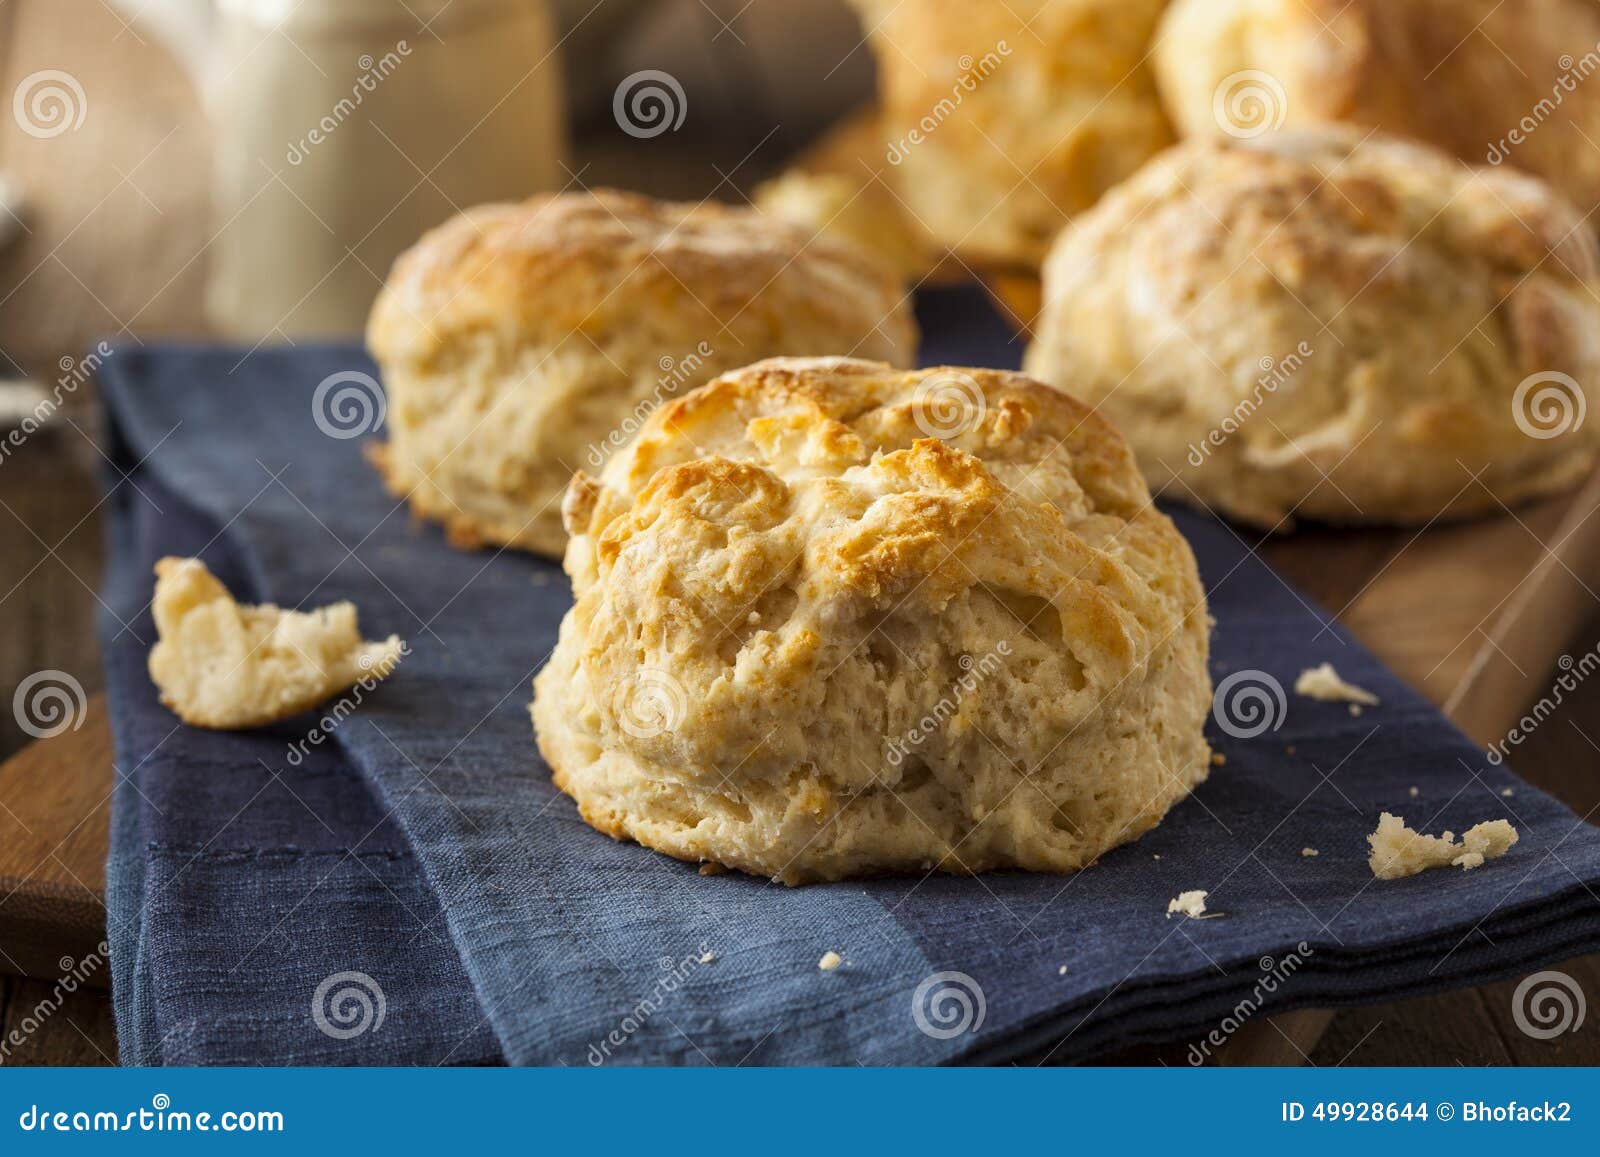 homemade flakey buttermilk biscuits